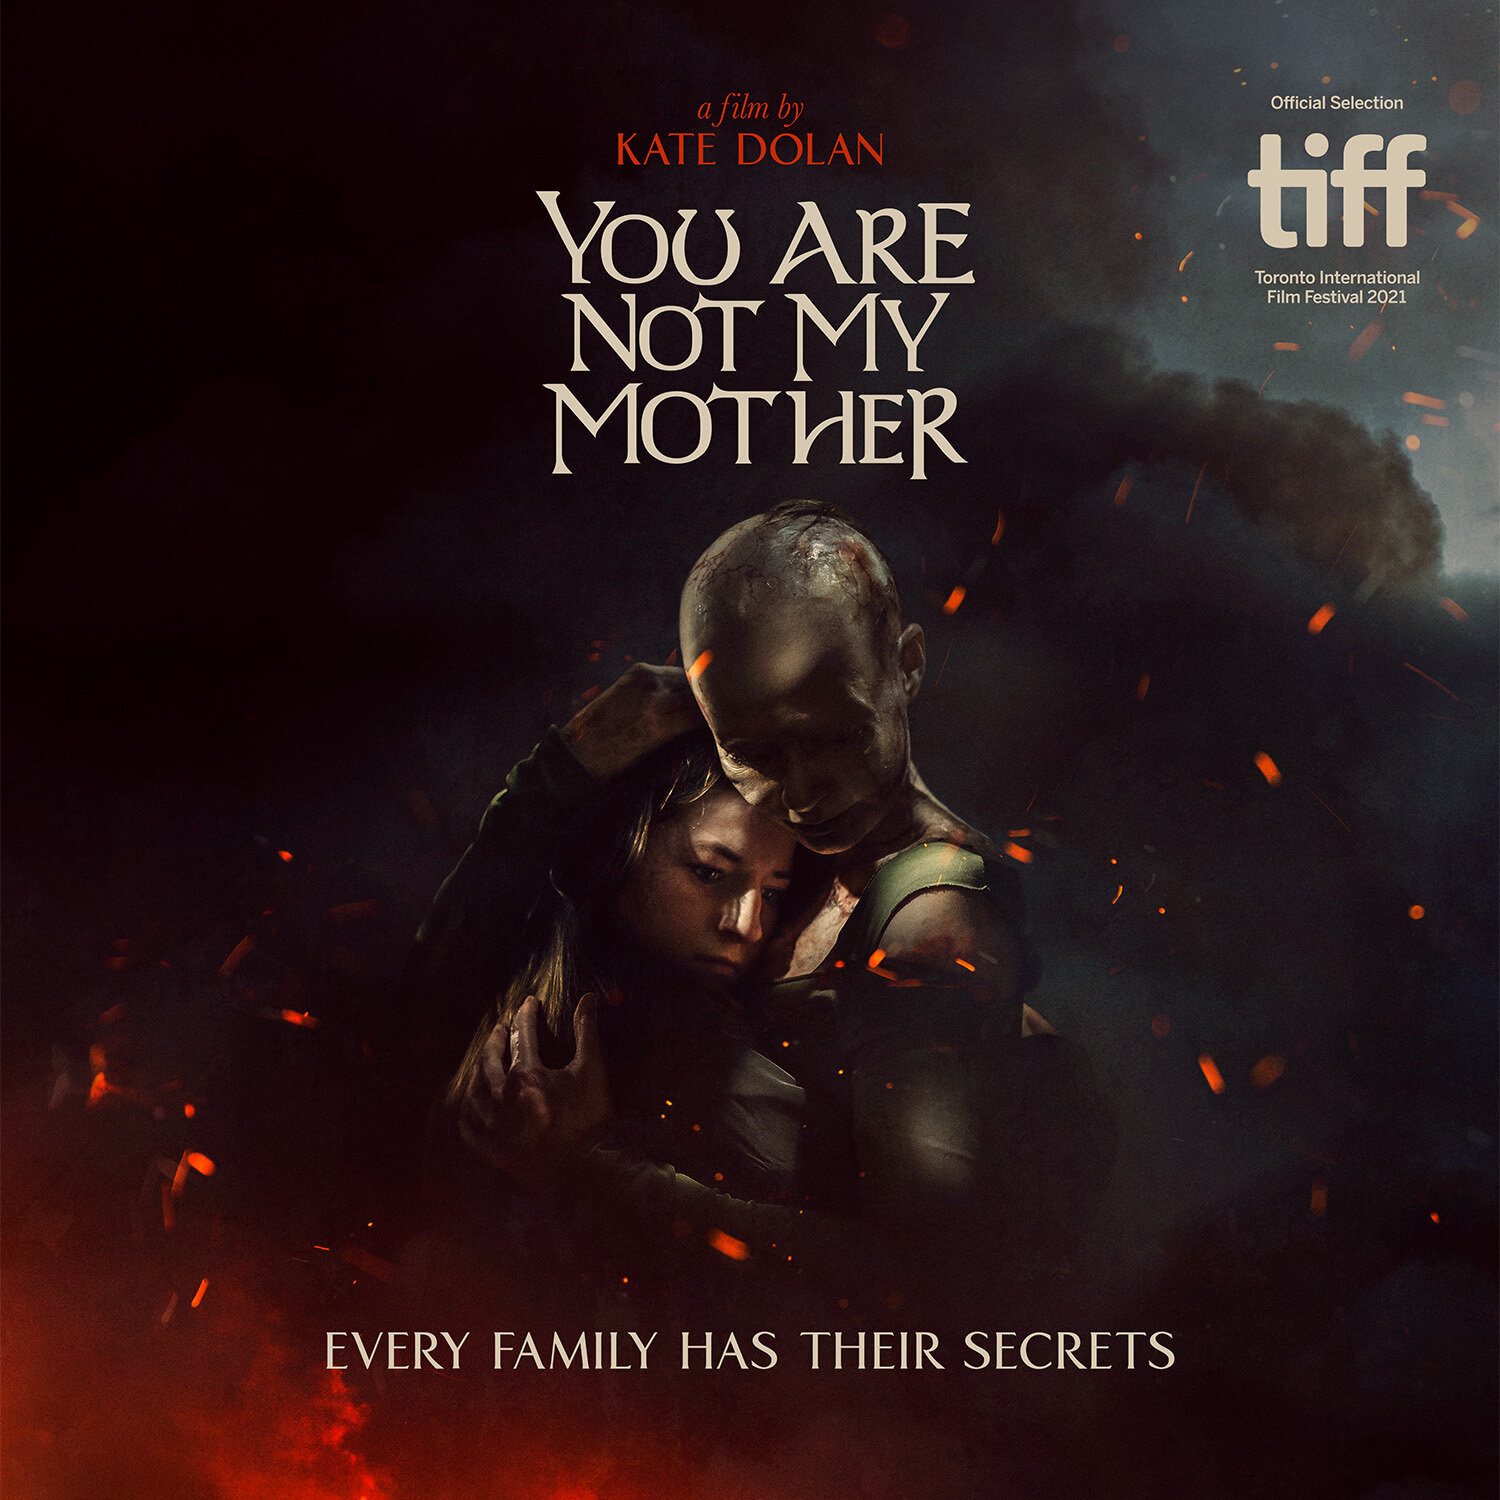 You Are Not My Mother / 2021 / 93min